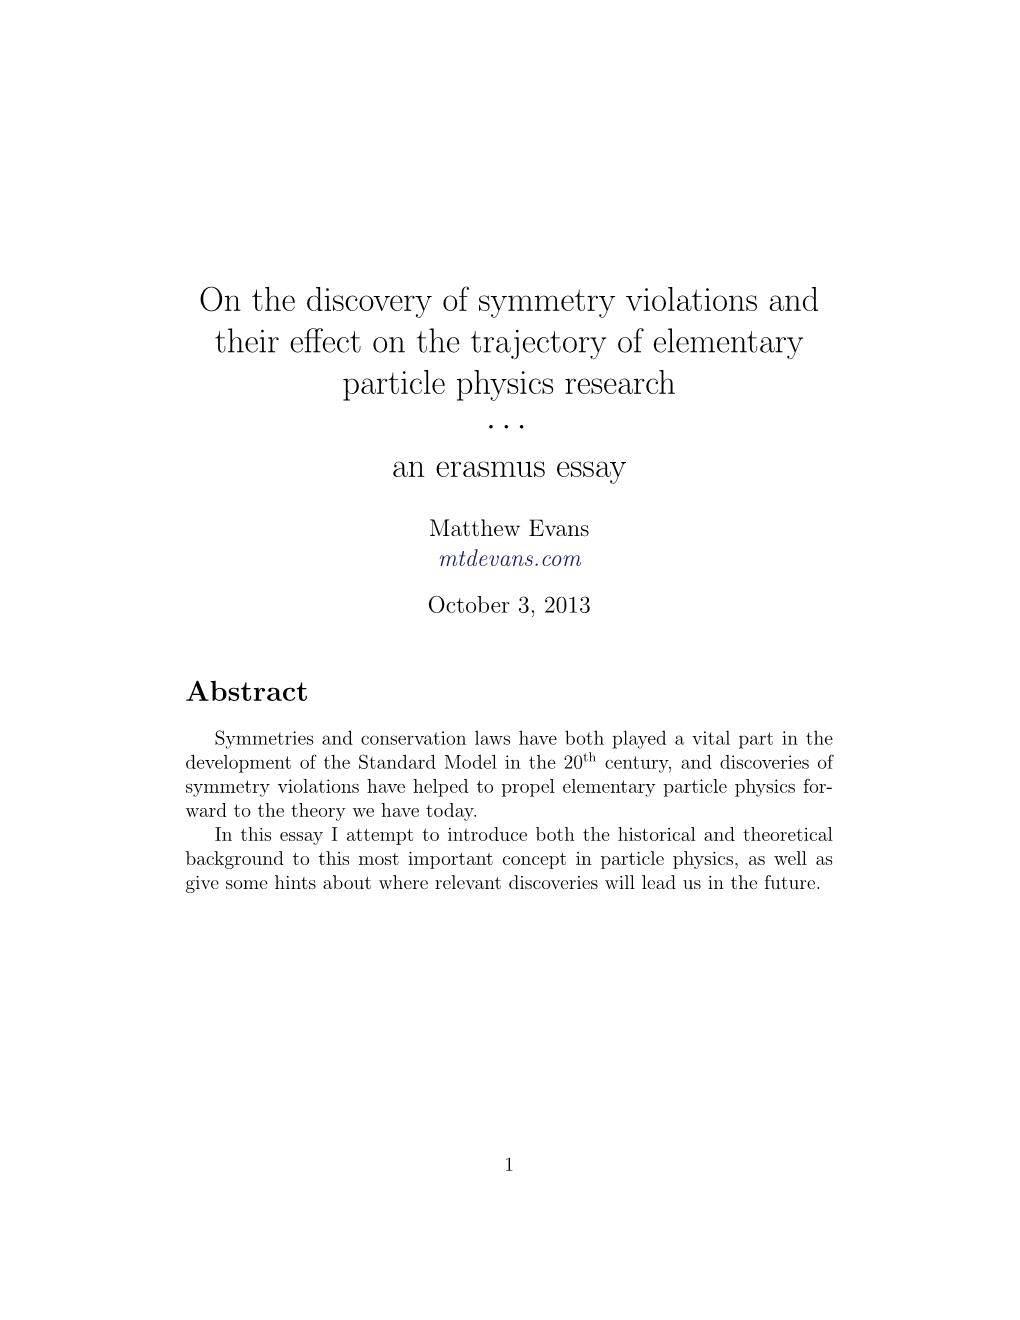 On the Discovery of Symmetry Violations and Their Effect on The